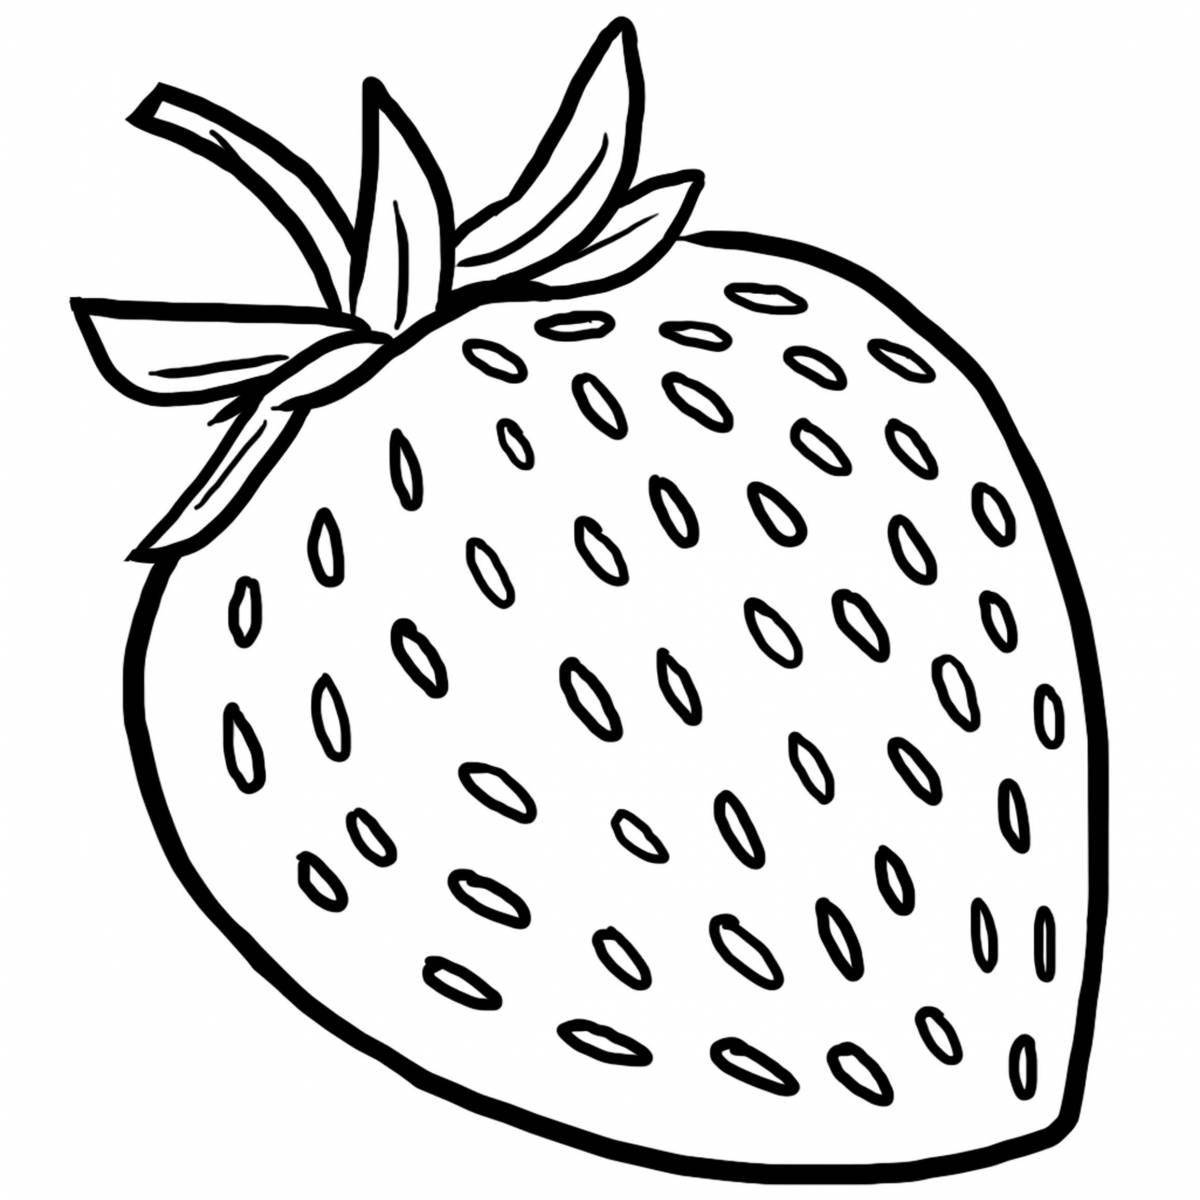 Colorful strawberry coloring book